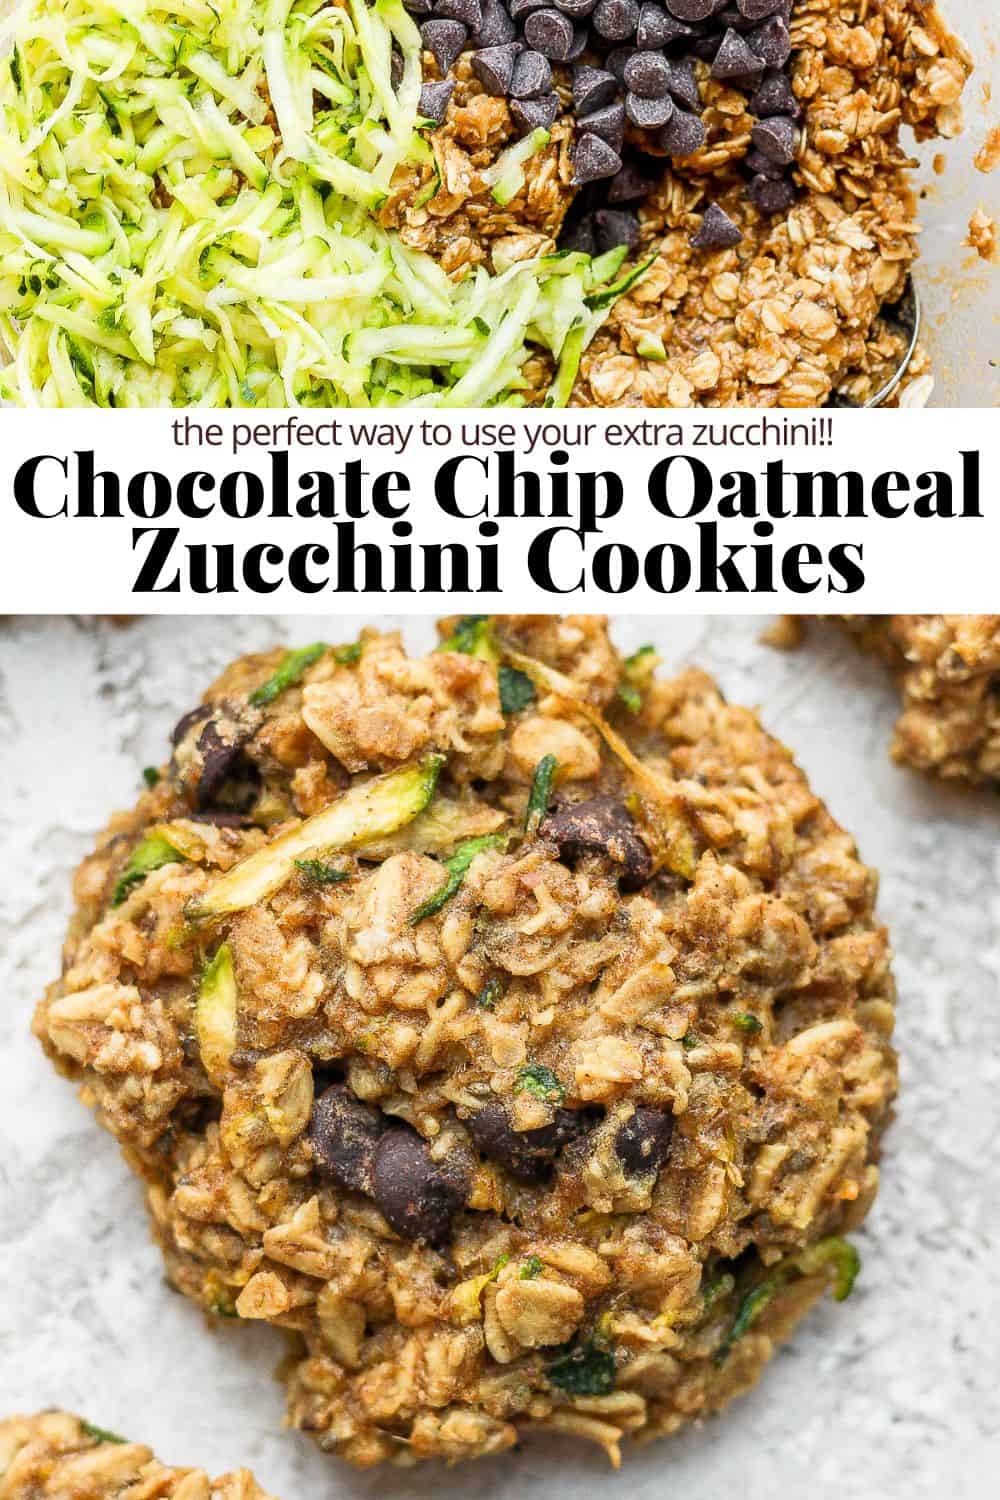 Pinterest image for zucchini cookies.